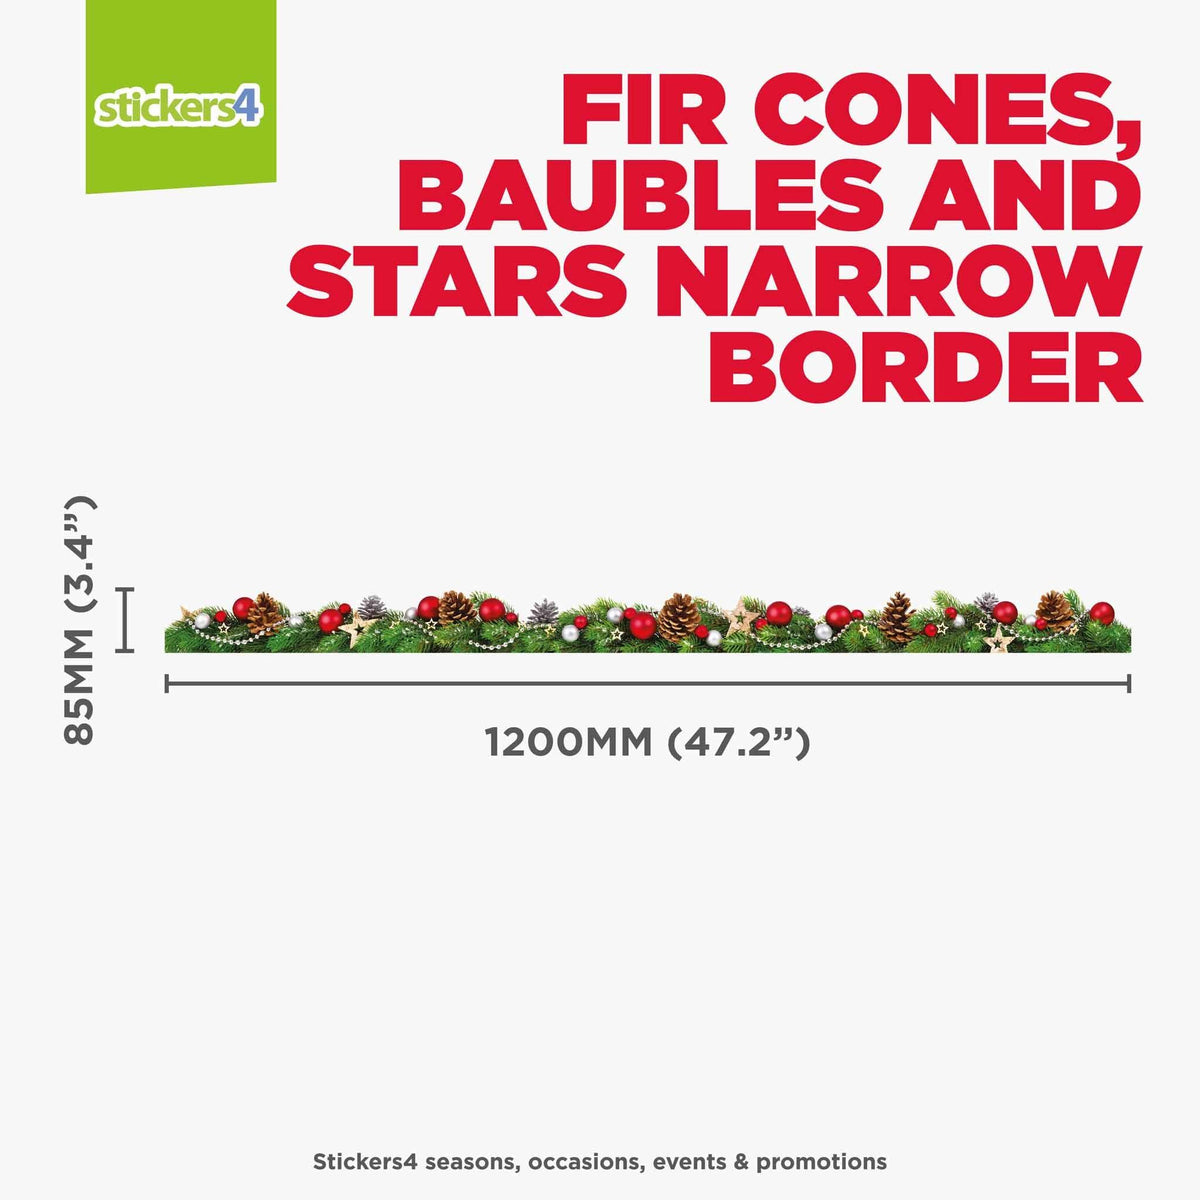 Fir Cones, Baubles and Stars Narrow Border Window Cling Sticker Christmas Window Display